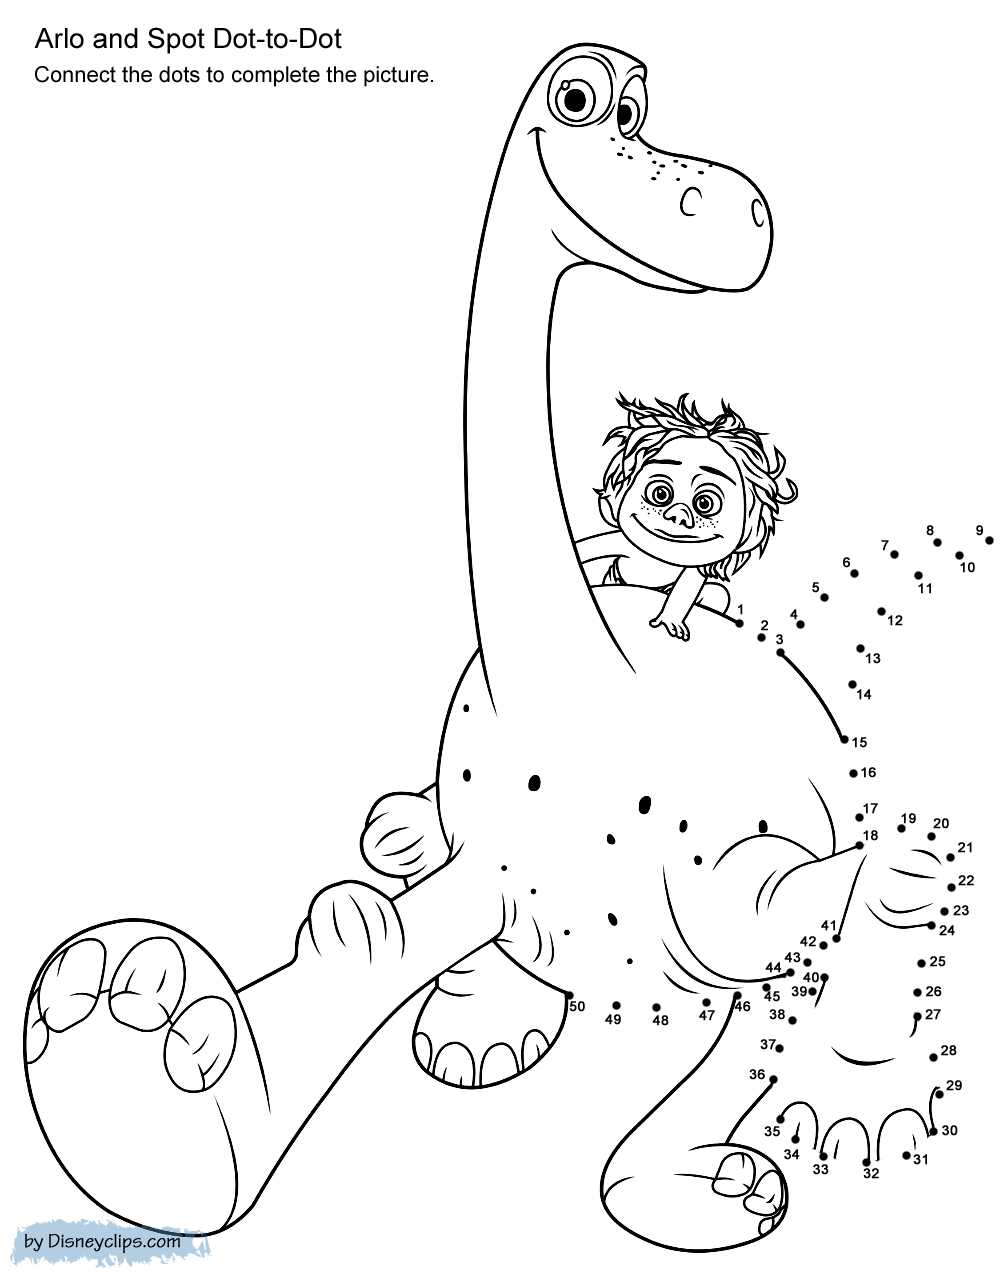 Printable Disney DottoDot Coloring Pages